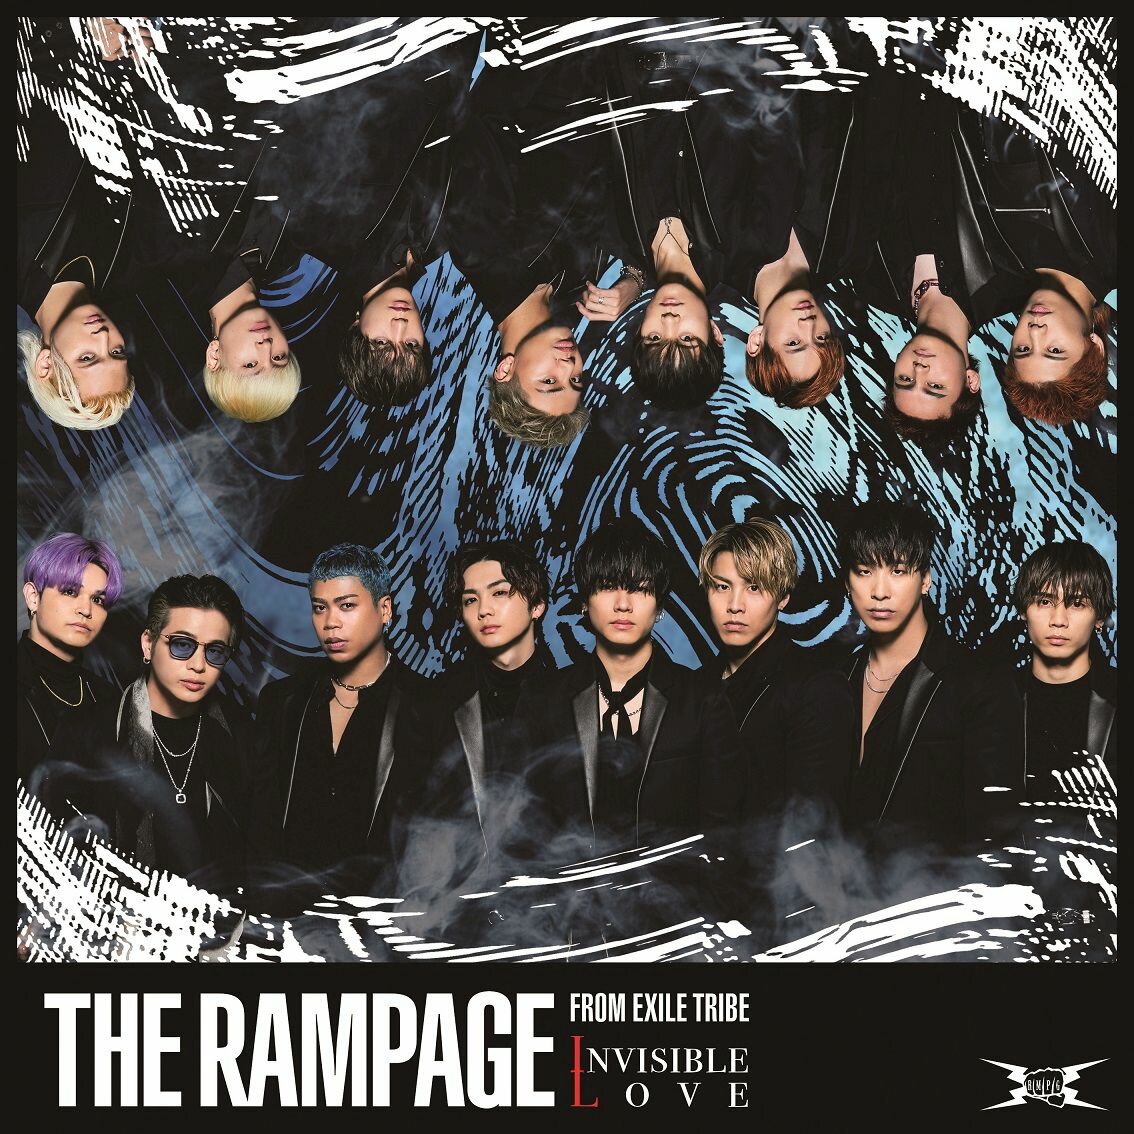 INVISIBLE LOVE (CD＋DVD) [ THE RAMPAGE from EXILE TRIBE ]